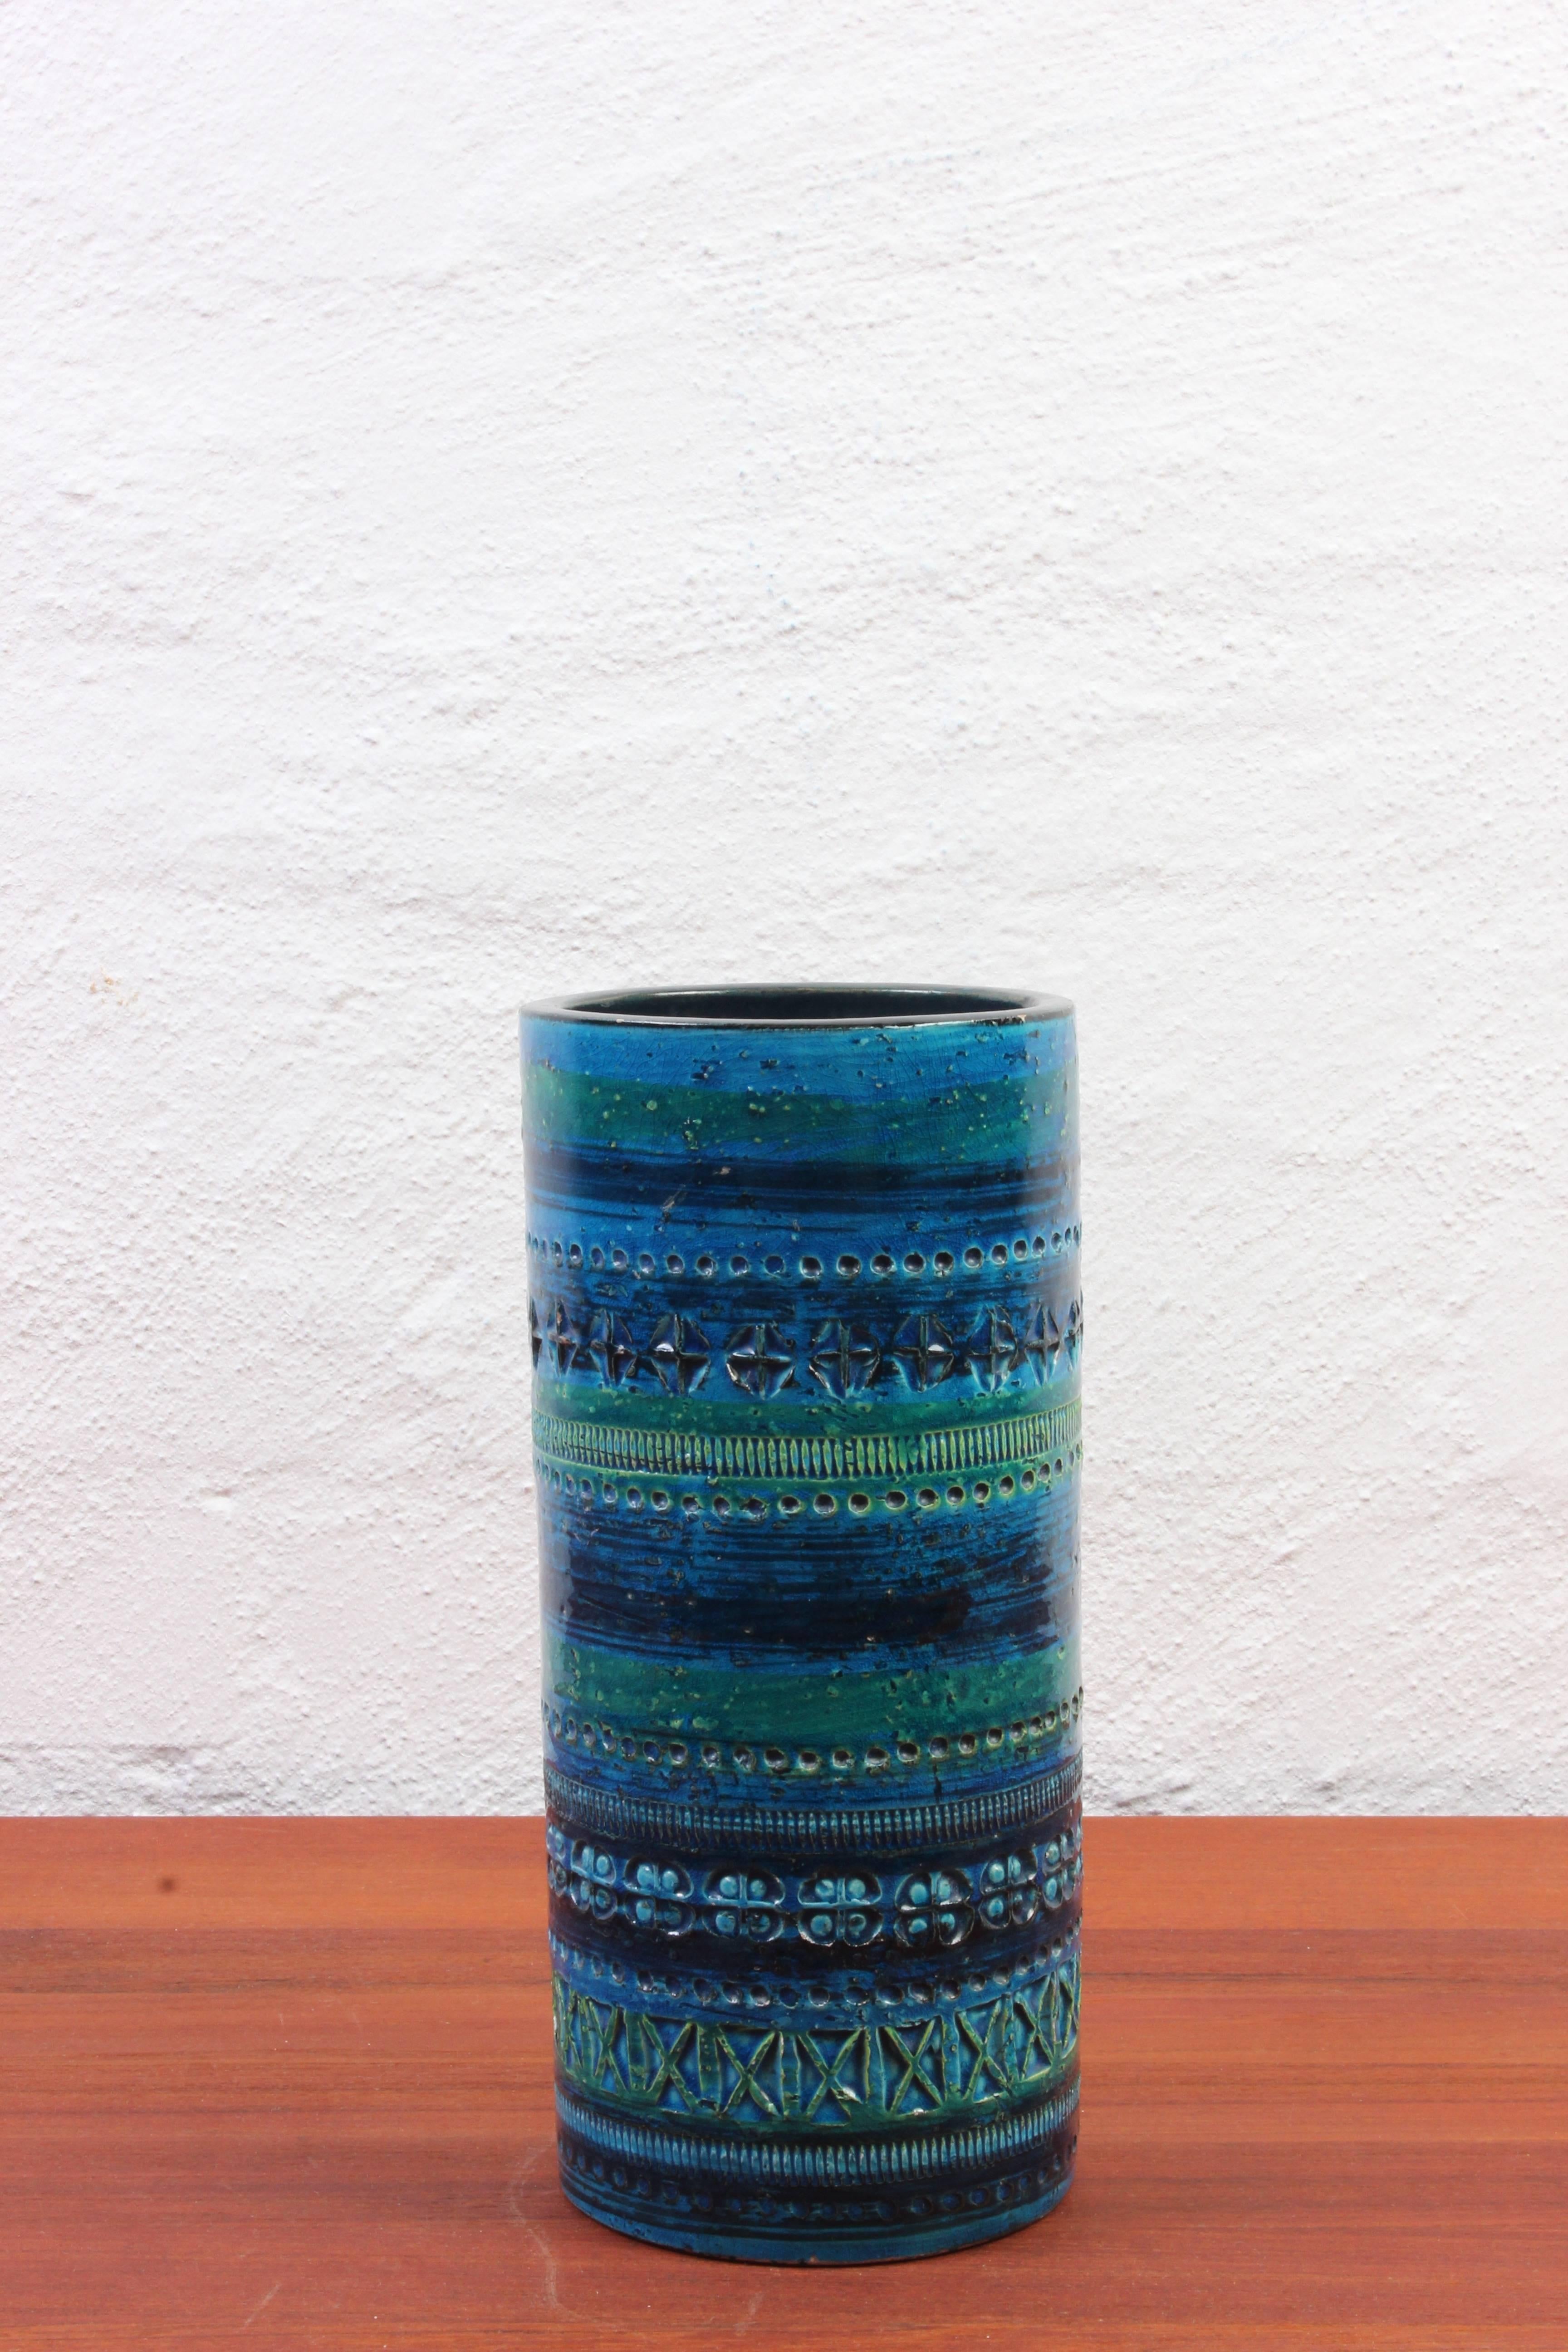 This blue Italian Bitossi ceramic vase is in good vintage condition with signs of usage consistent with age and use. This specific color is called 